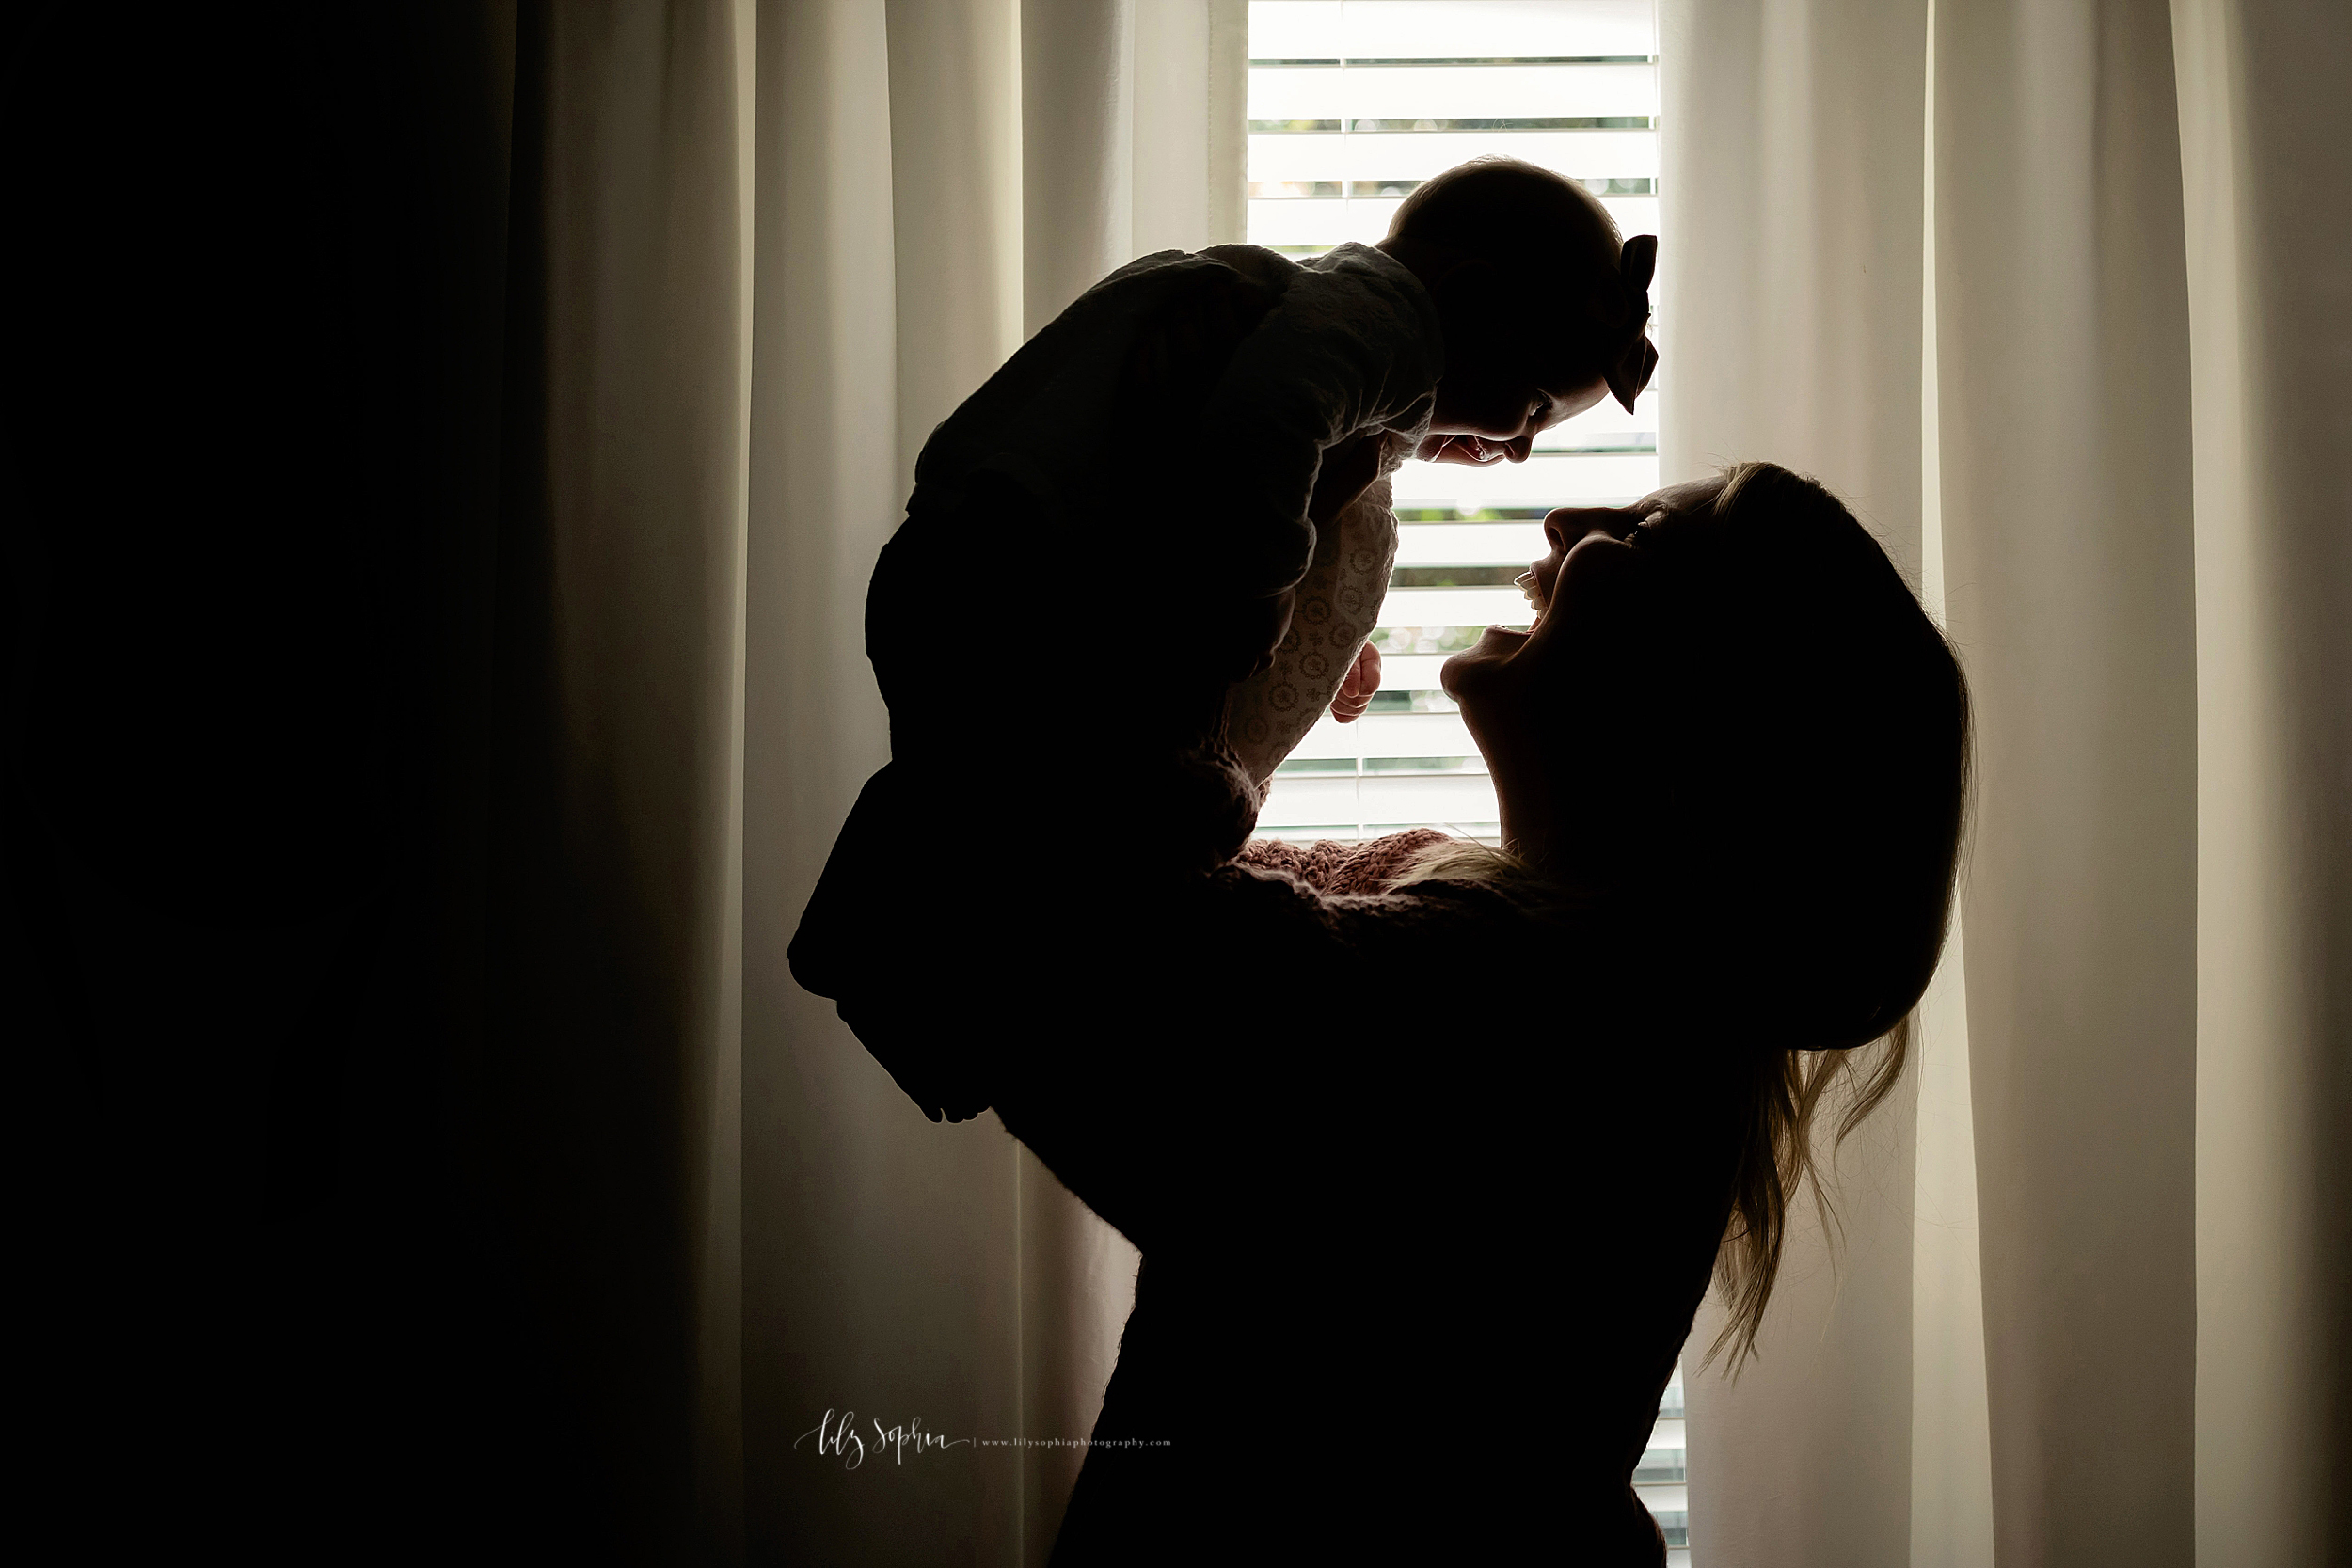  Silouhette profile image of a mom and her baby girl in front of a window in their home.  Mom is standing holding her daughter under her arms and lifting her above her head.  Both Mom and the daughter are smiling at one another as the light filters i